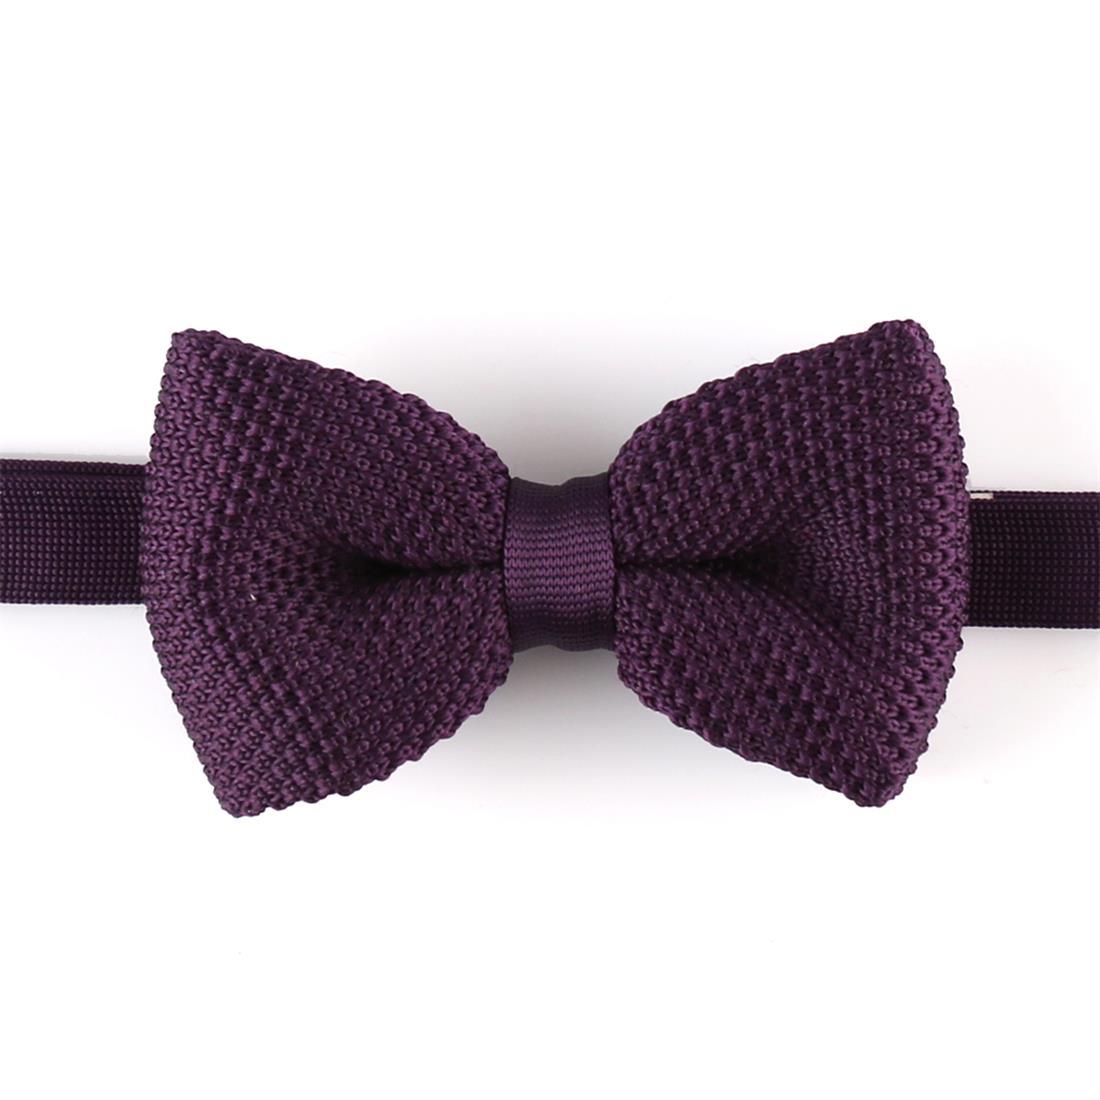 Romantic Solid Purple Fashionable Silk or Polyester Knitted Bow Tie (YWZJ 18)